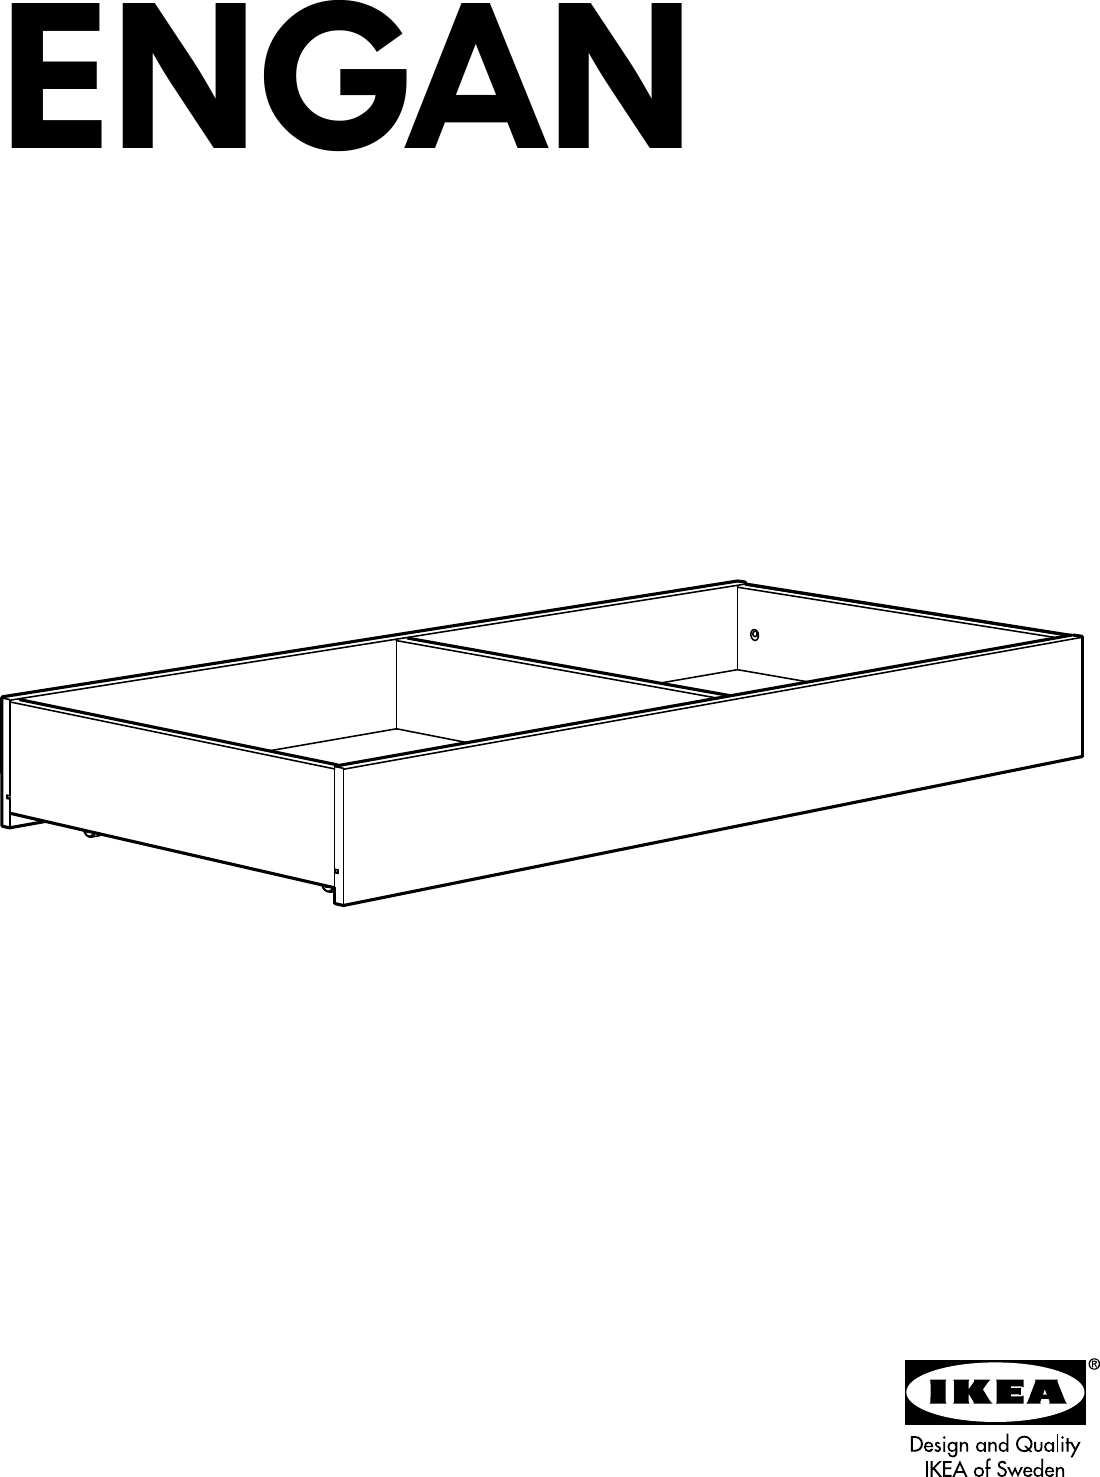 Page 1 of 8 - Ikea Ikea-Engan-Bed-Storage-Box-Assembly-Instruction